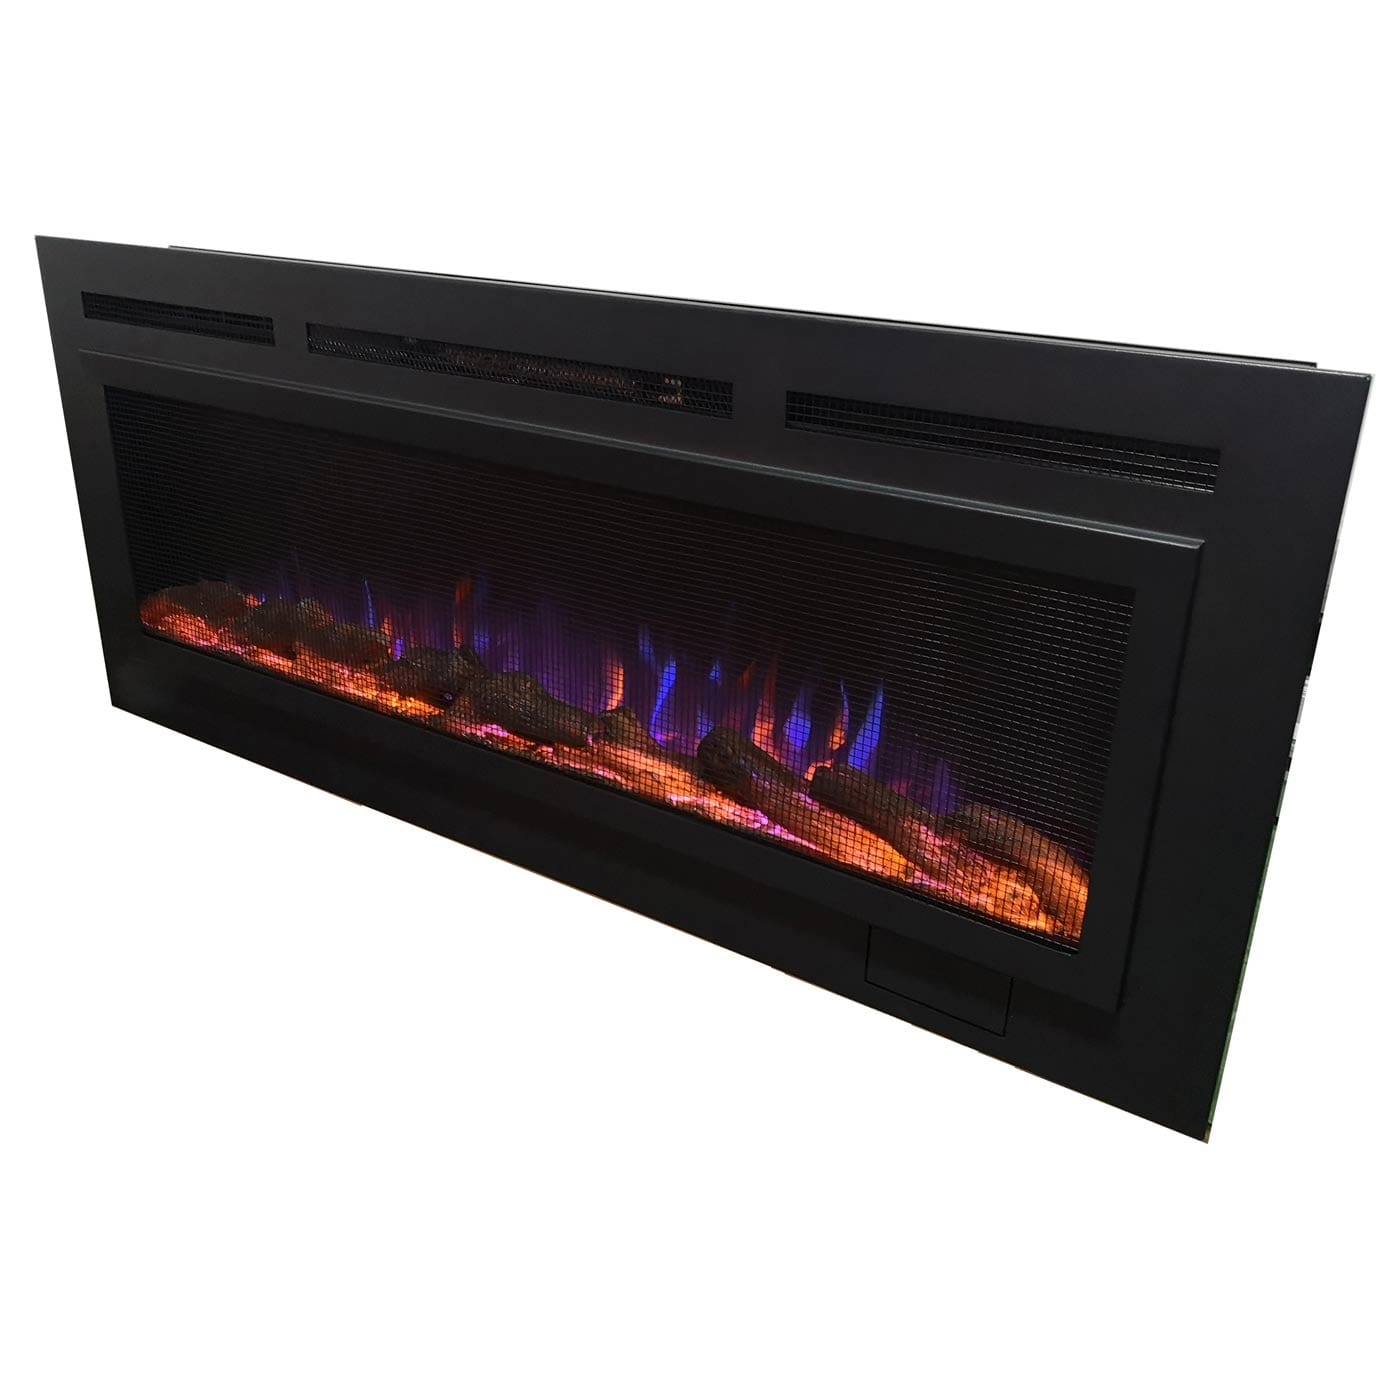 Black mesh, non reflective front of the Touchstone Sideline Steel Mesh Electric Fireplace